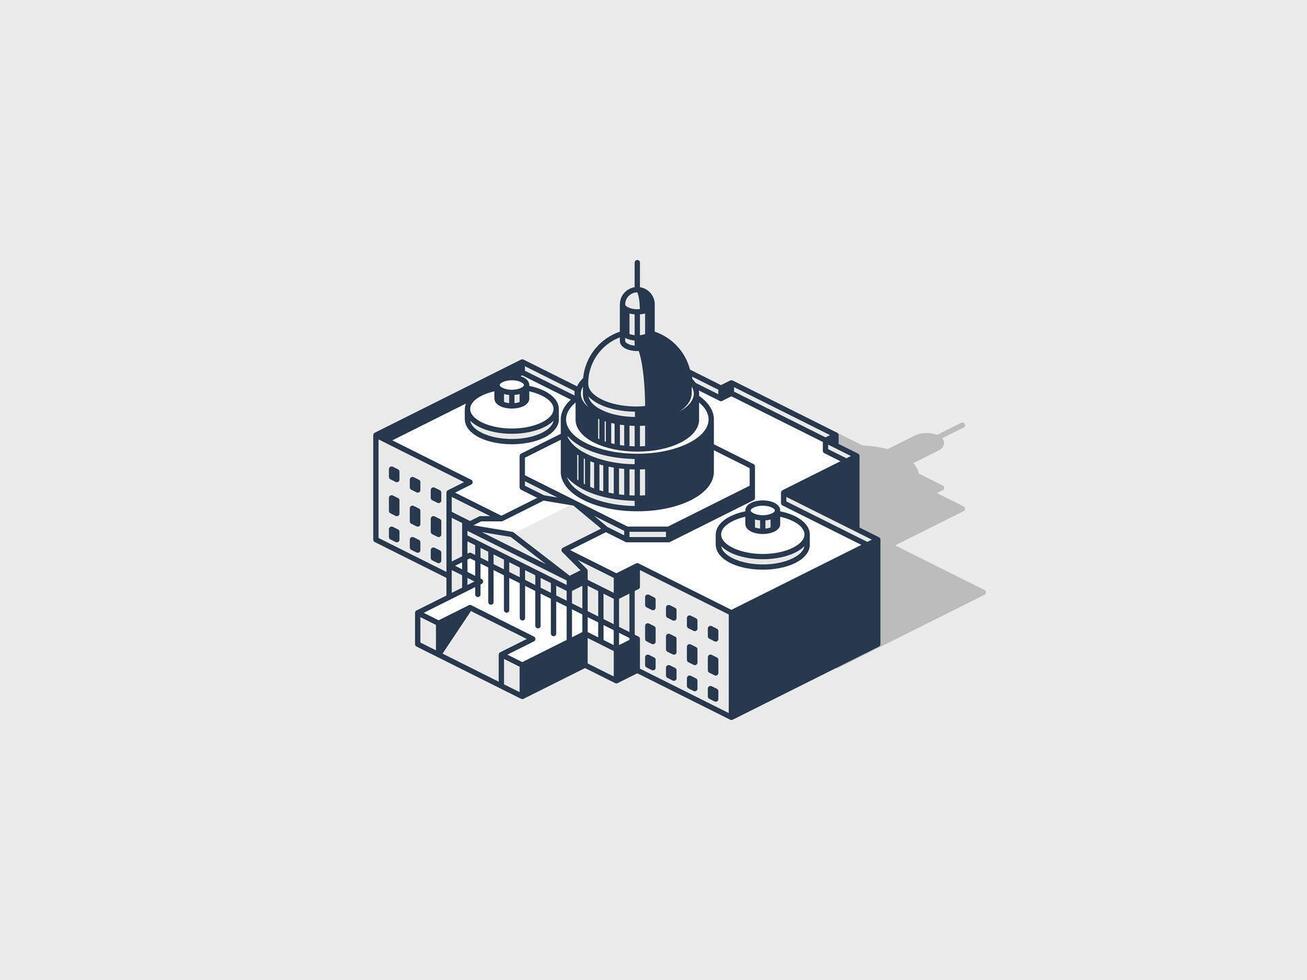 White house capitol building isometric vector illustration with shadow